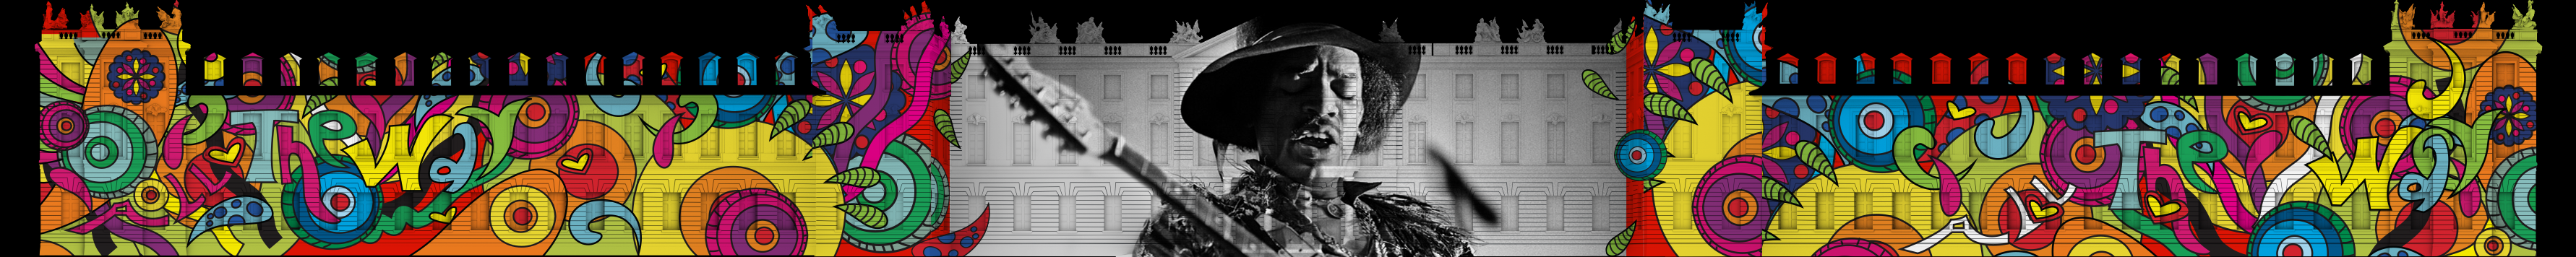 The bust of a musician with hat and moustache appears in front of a castle façade. His guitar protrudes diagonally into the picture. His eyes are closed and he wears a jacket with feathers. To the left and right, the building is covered with colourful flo